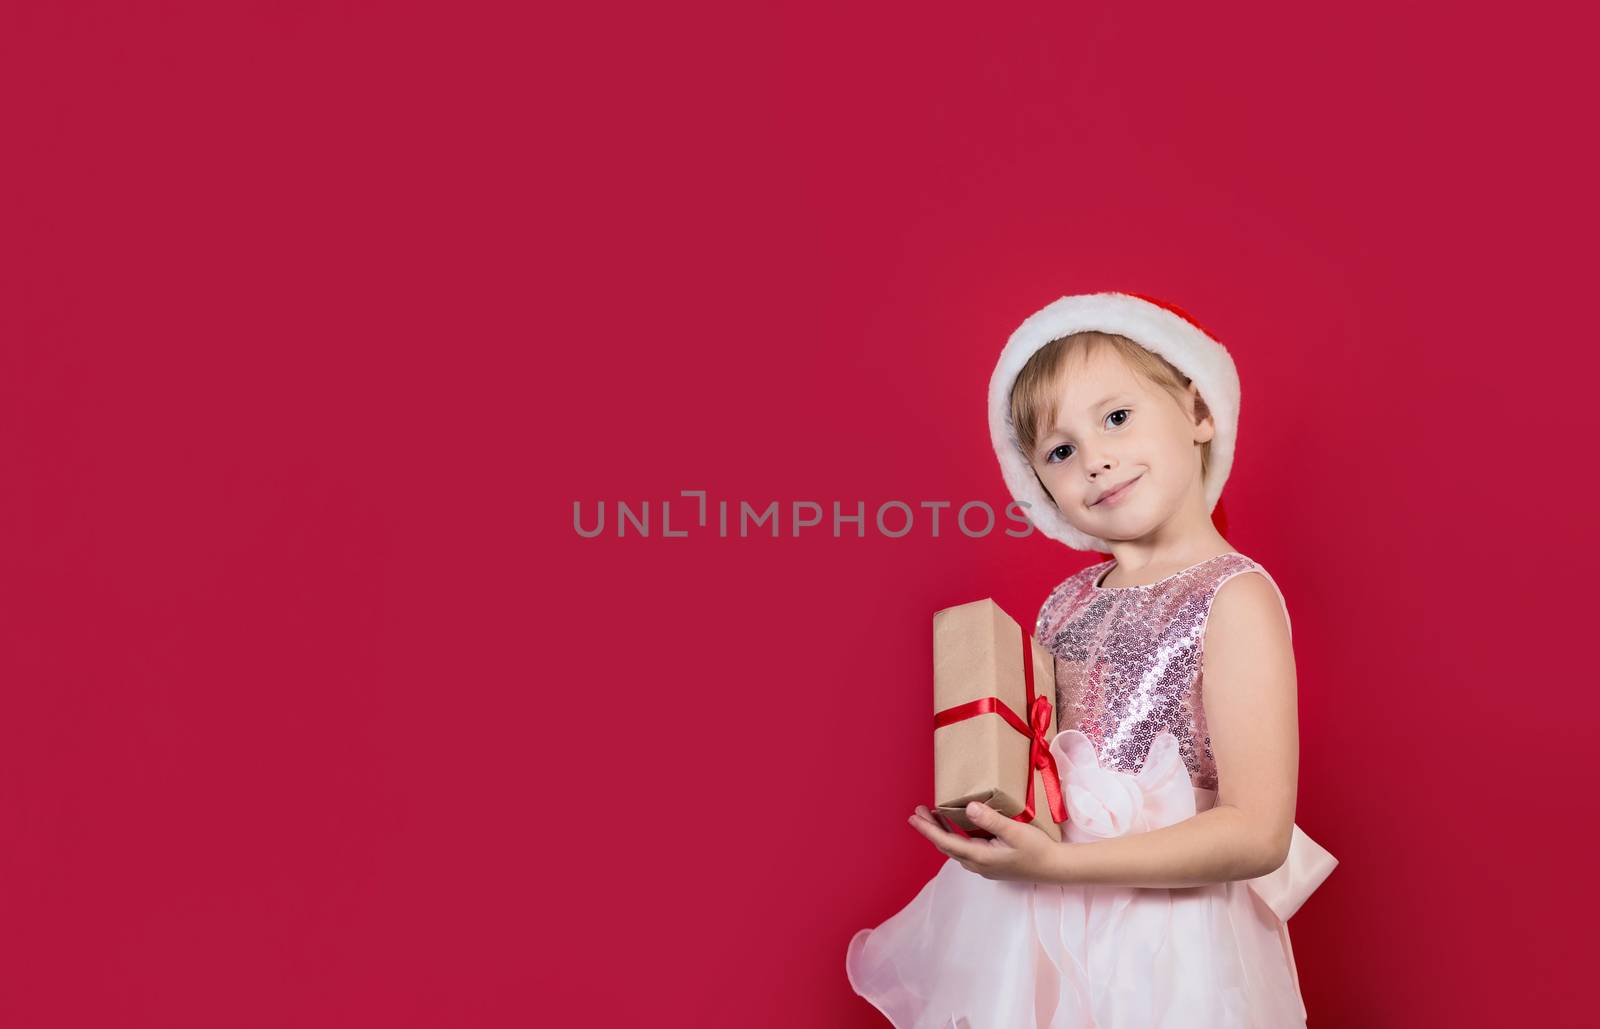 Smiling funny cacusian cute child girl in santa hat looking at the camera with gift box celebrating happy 2021 New Year isolated on red background. Merry Christmas presents shopping sale.